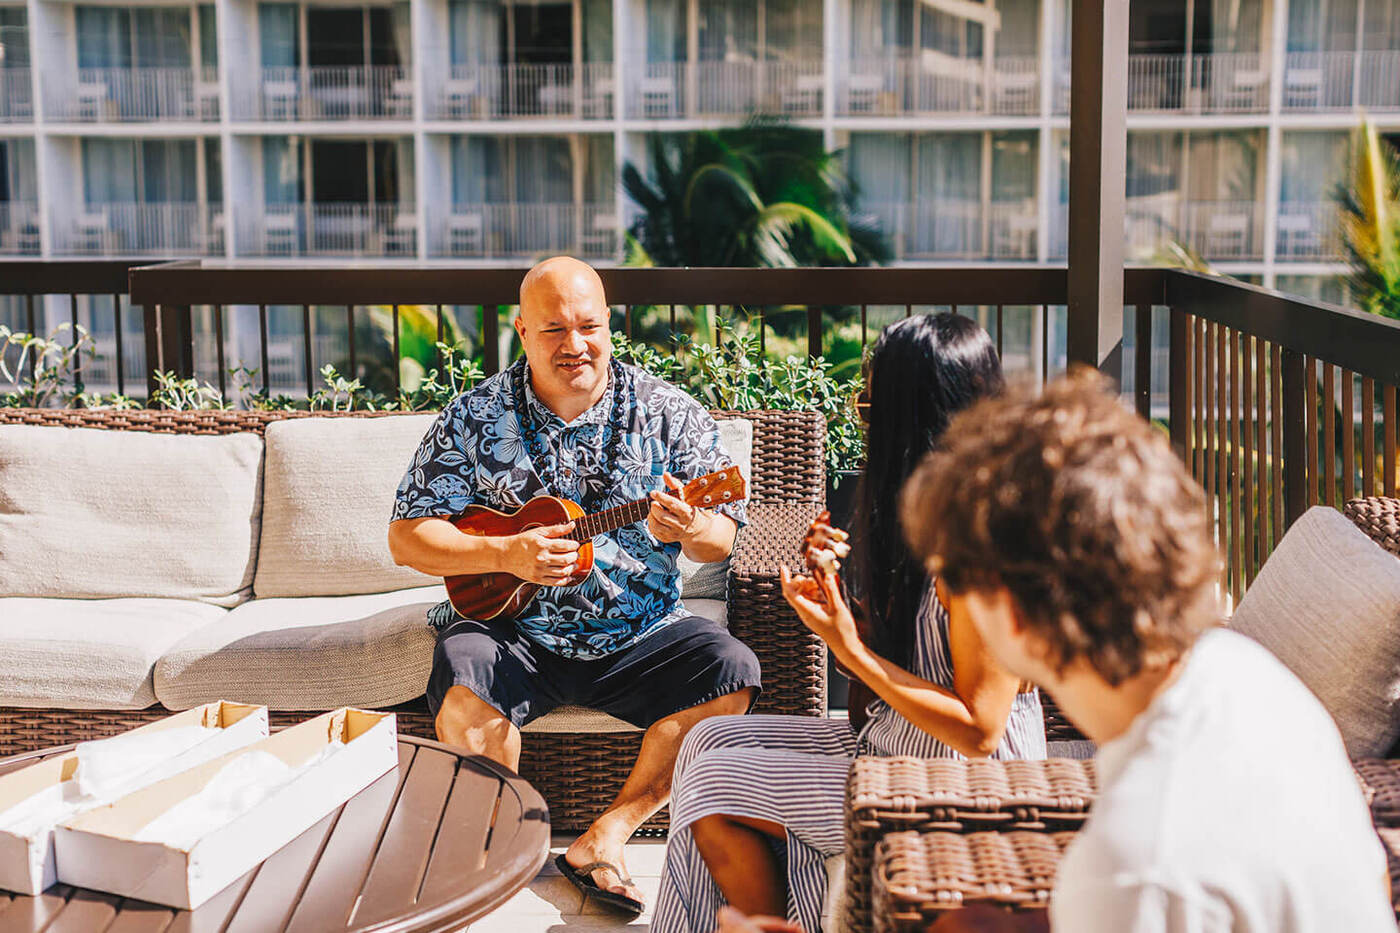 Man showing guests how to use ukulele